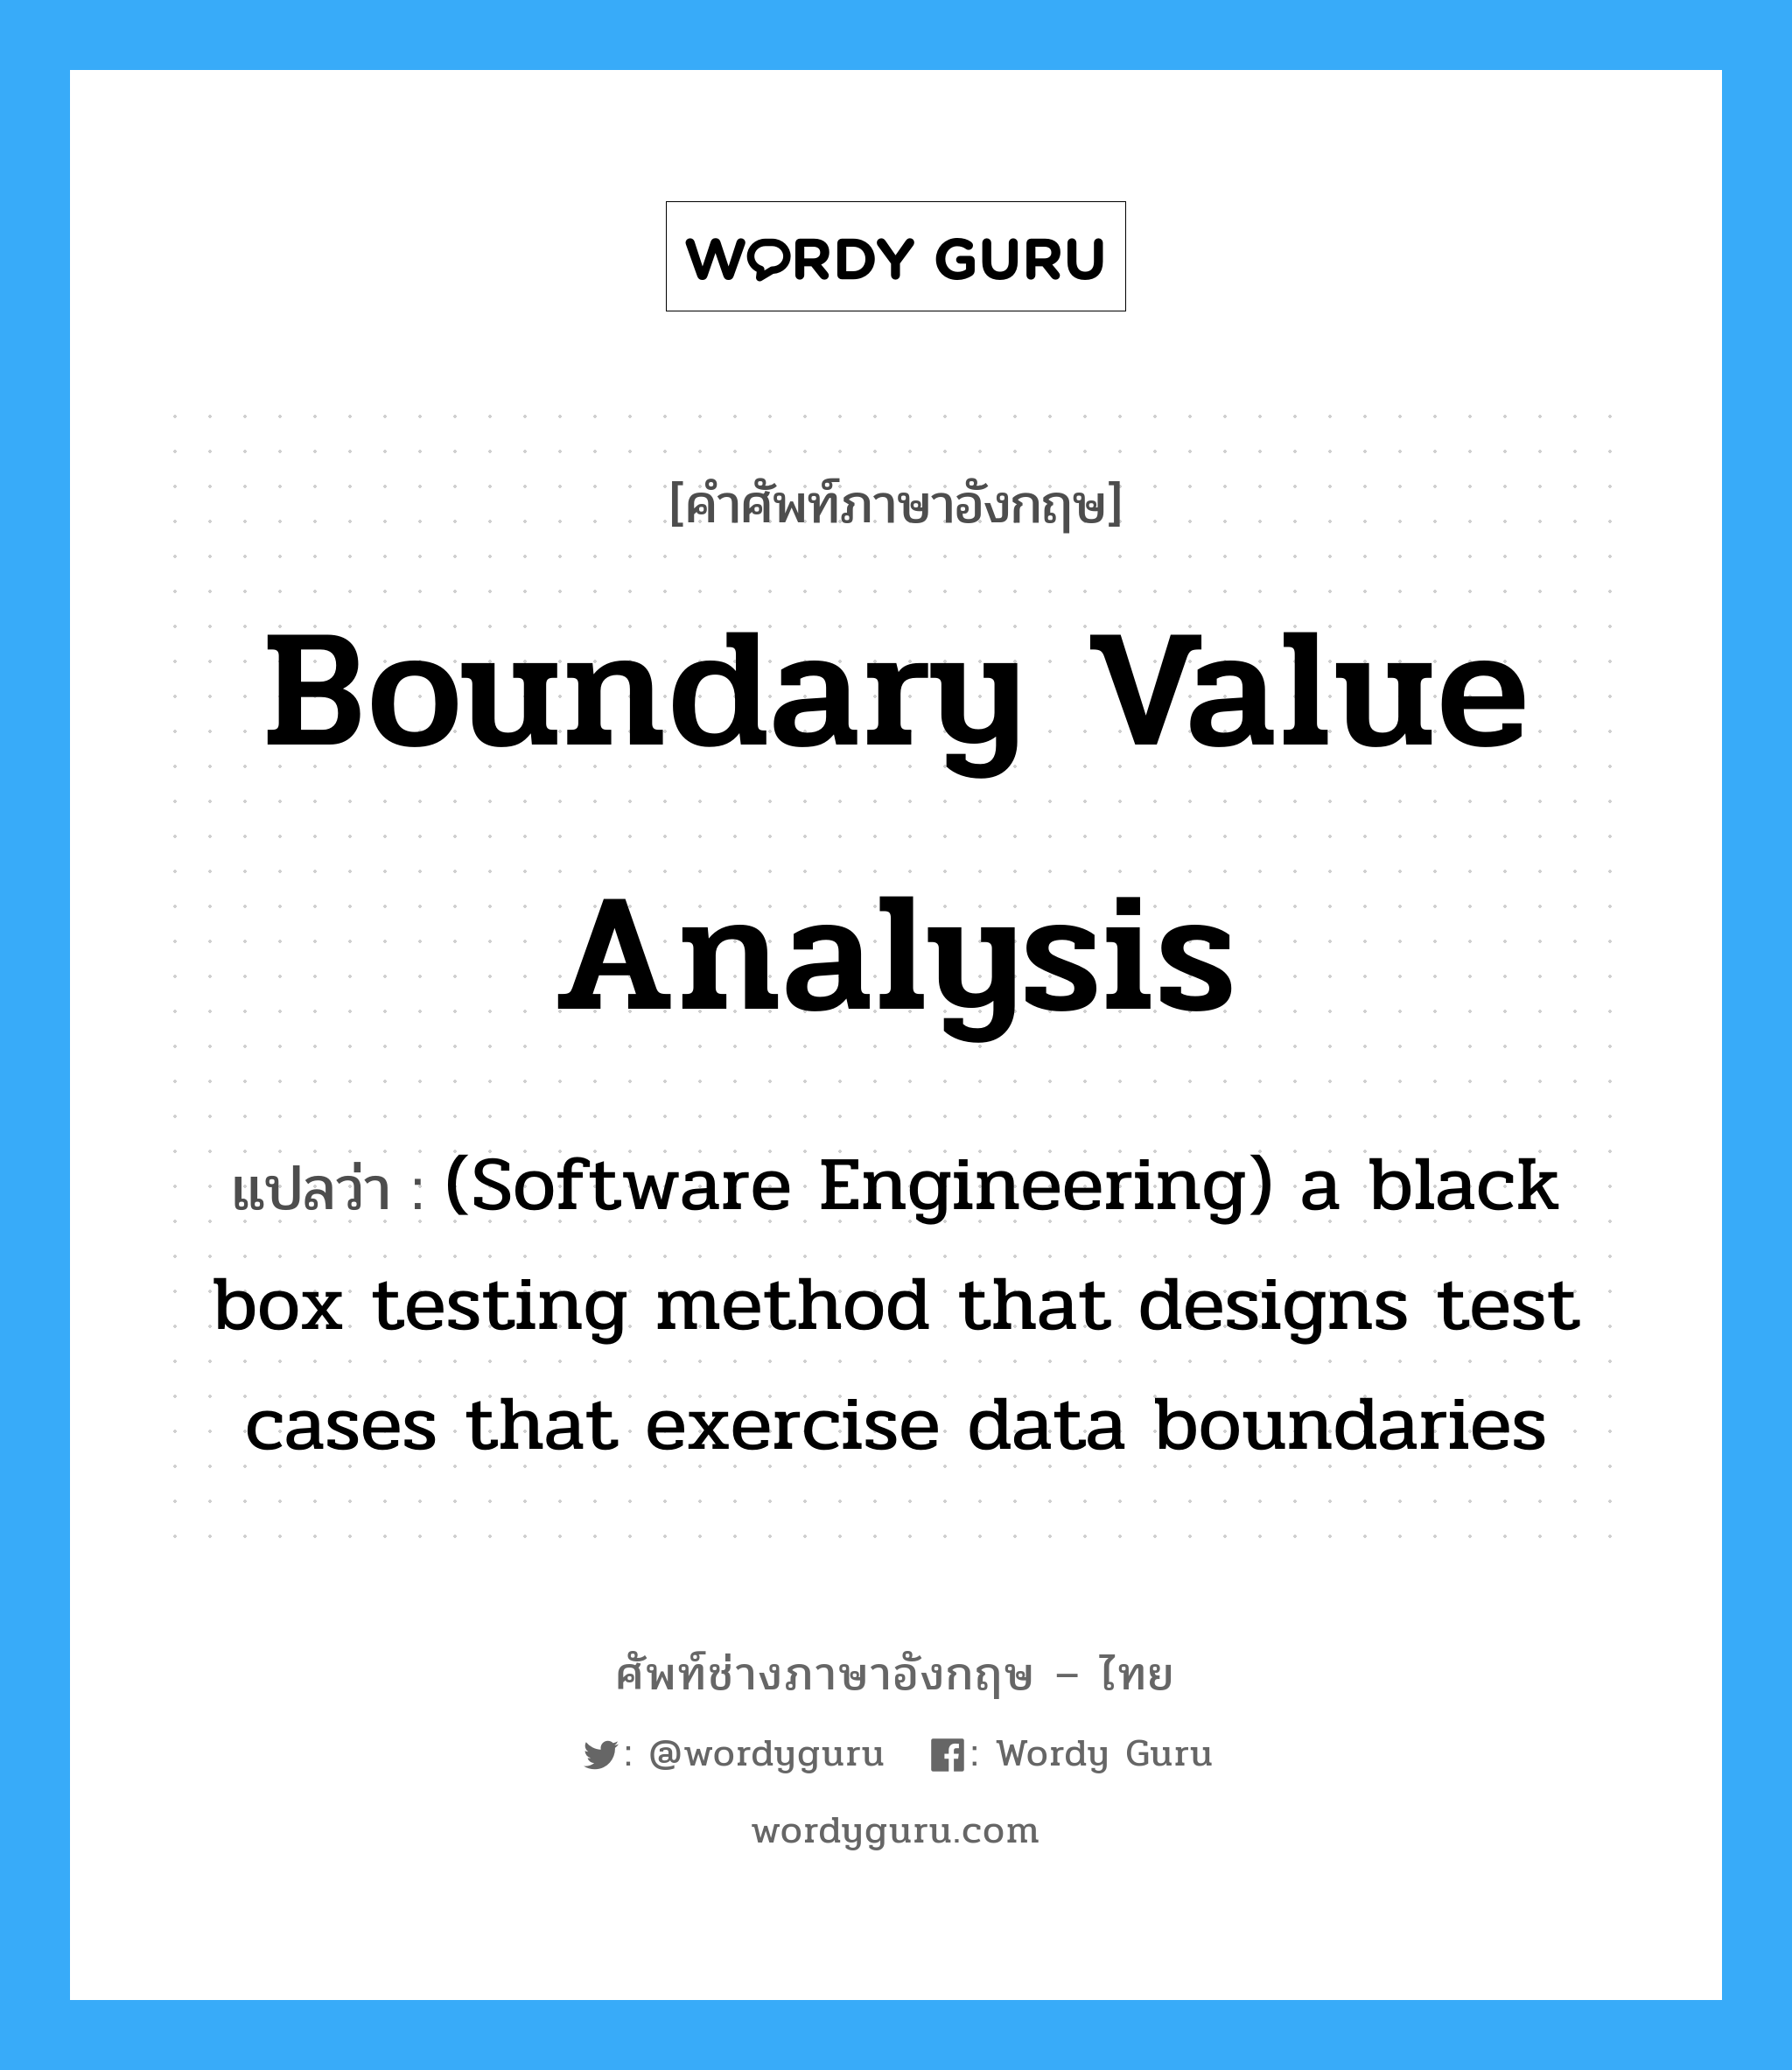 (Software Engineering) a black-box testing method ภาษาอังกฤษ?, คำศัพท์ช่างภาษาอังกฤษ - ไทย (Software Engineering) a black box testing method that designs test cases that exercise data boundaries คำศัพท์ภาษาอังกฤษ (Software Engineering) a black box testing method that designs test cases that exercise data boundaries แปลว่า Boundary value analysis